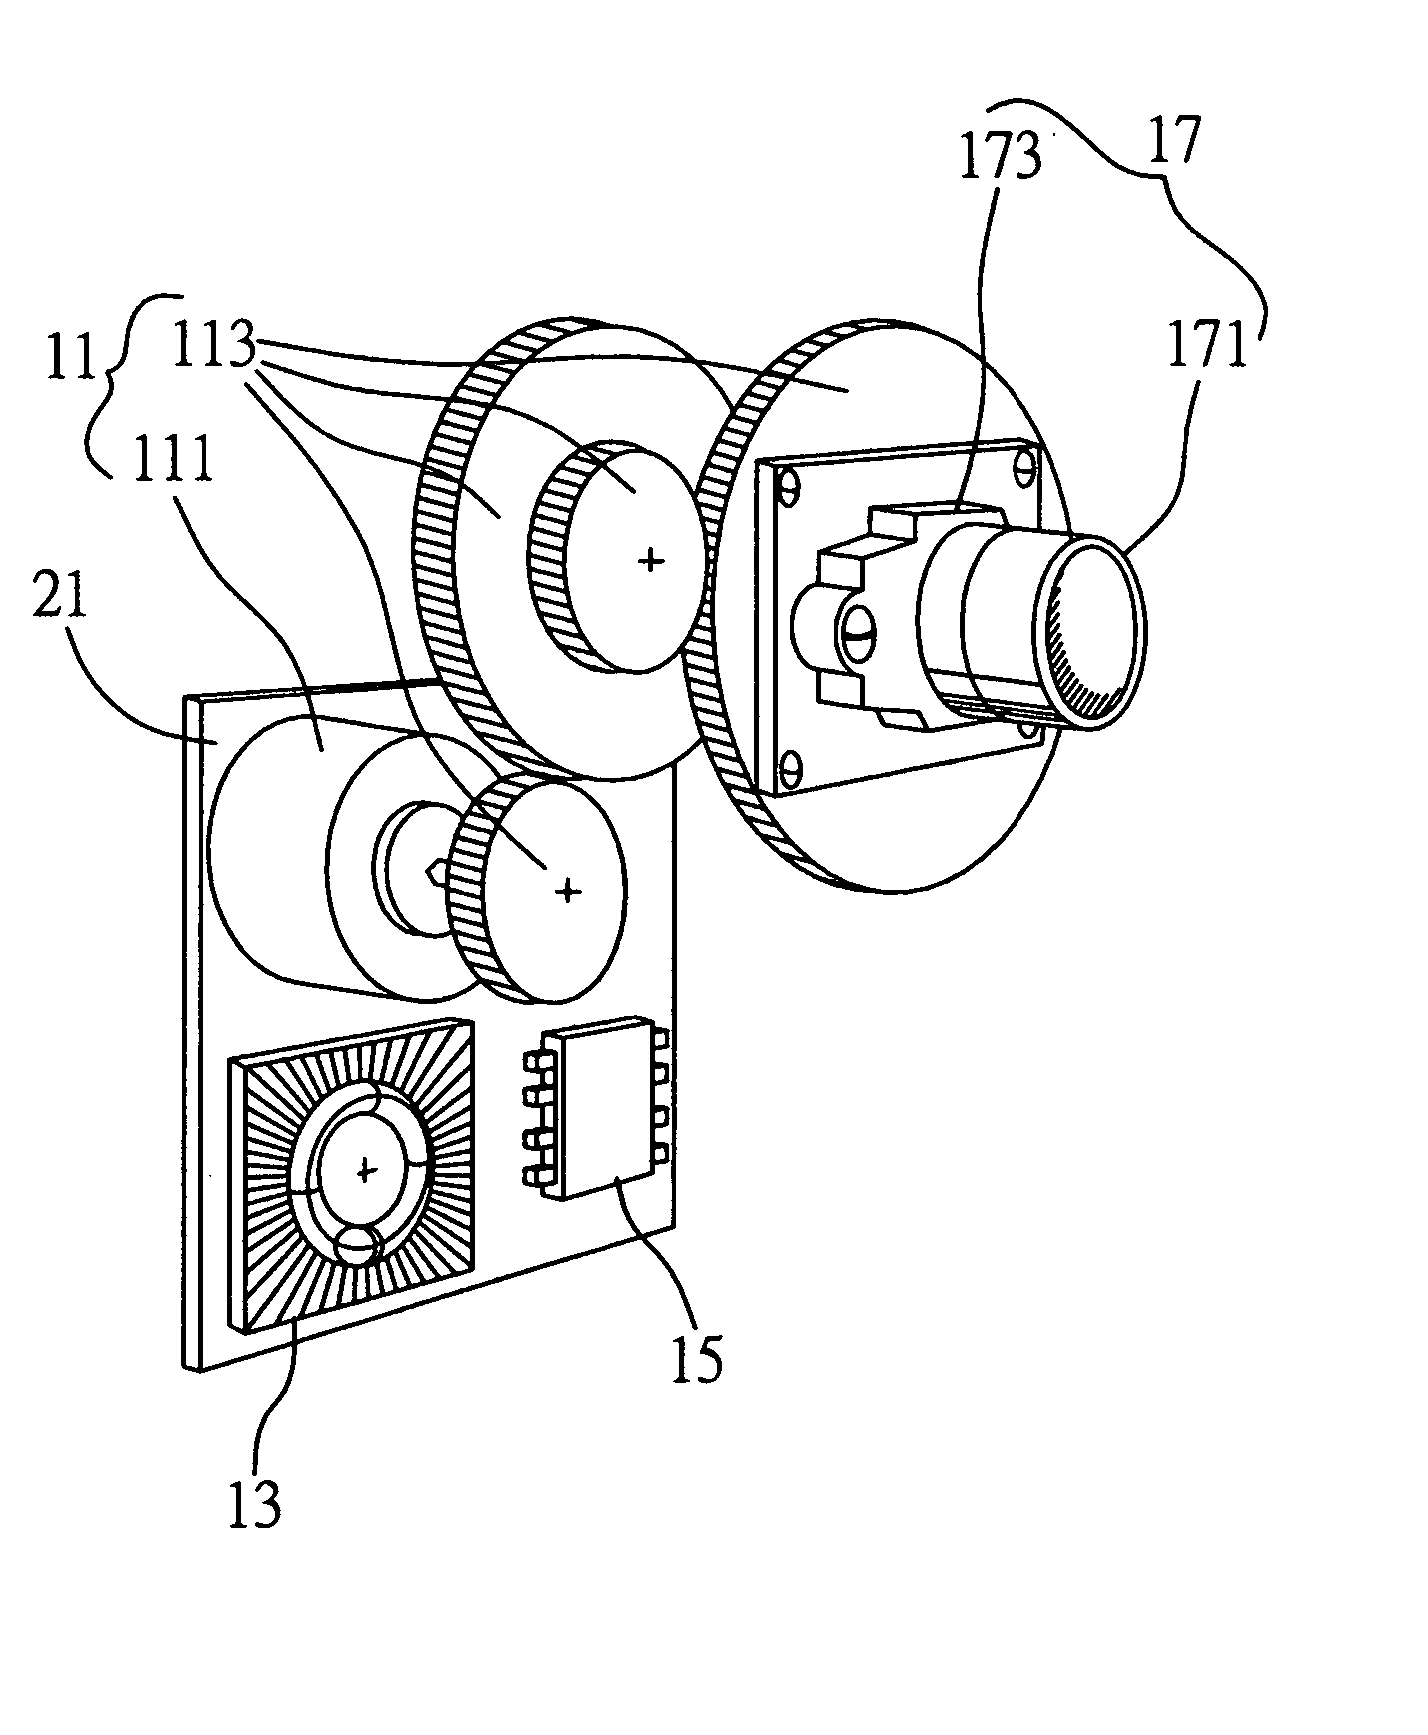 Automatic angle adjusting system